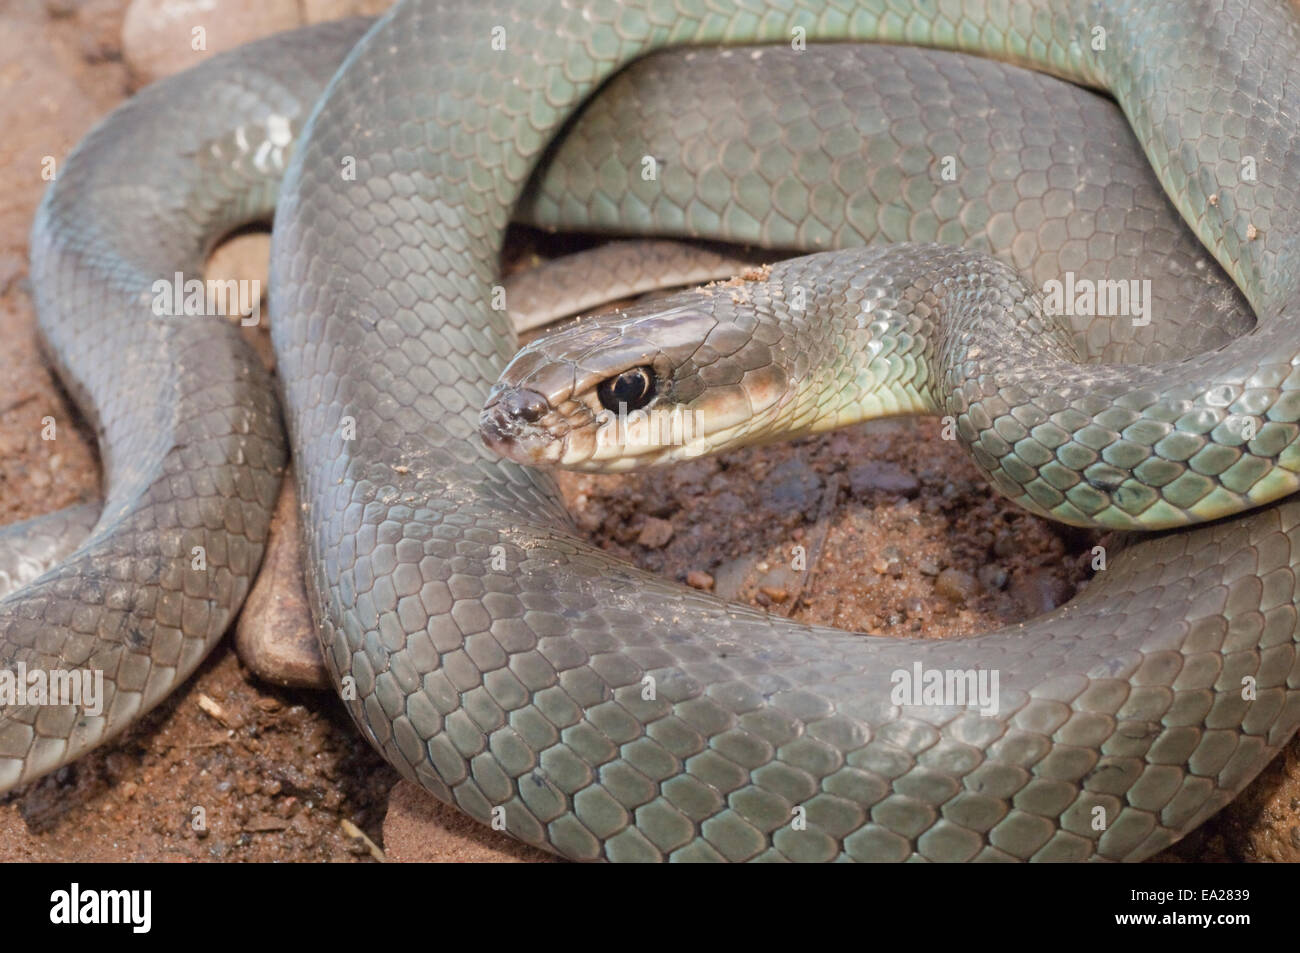 Blue racer, Coluber constrictor foxi, native to North America Stock Photo